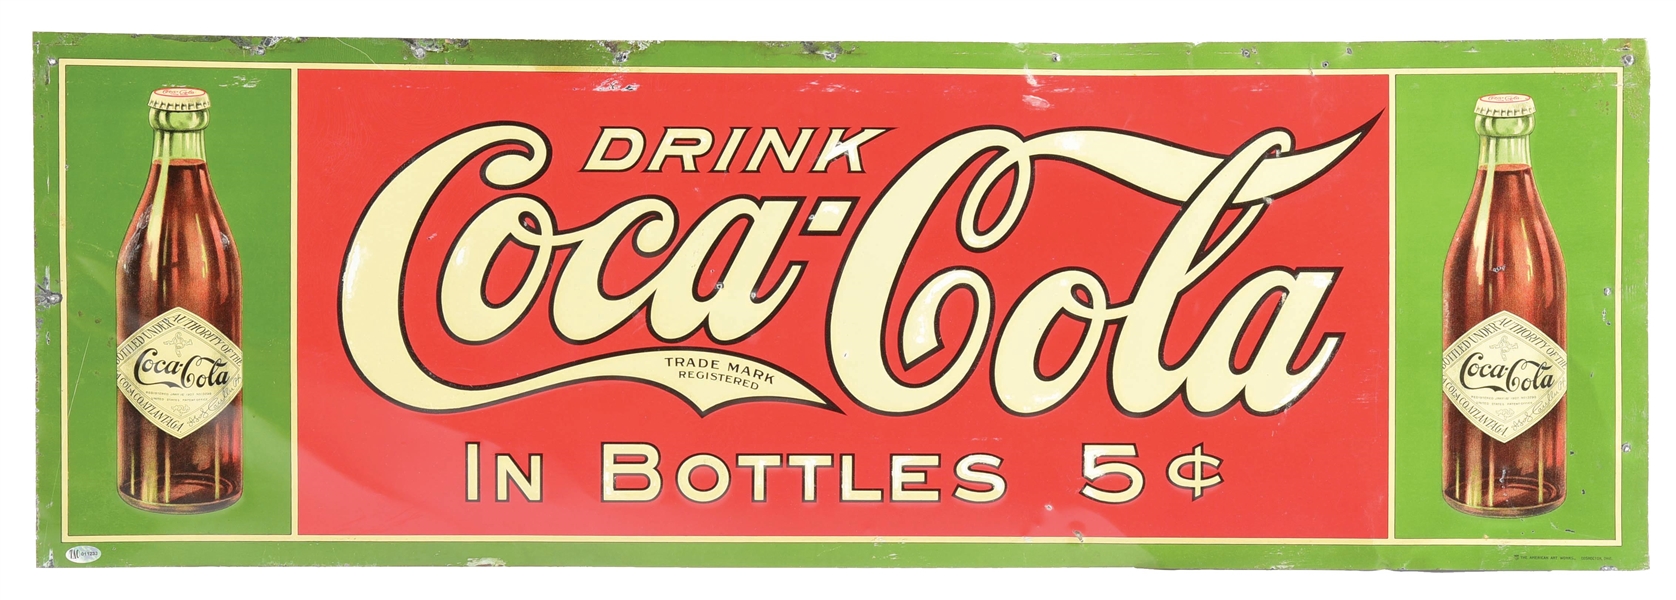 DRINK COCA COLA IN BOTTLES 5¢ EMBOSSED TIN SIGN W/ EARLY BOTTLE GRAPHIC. 